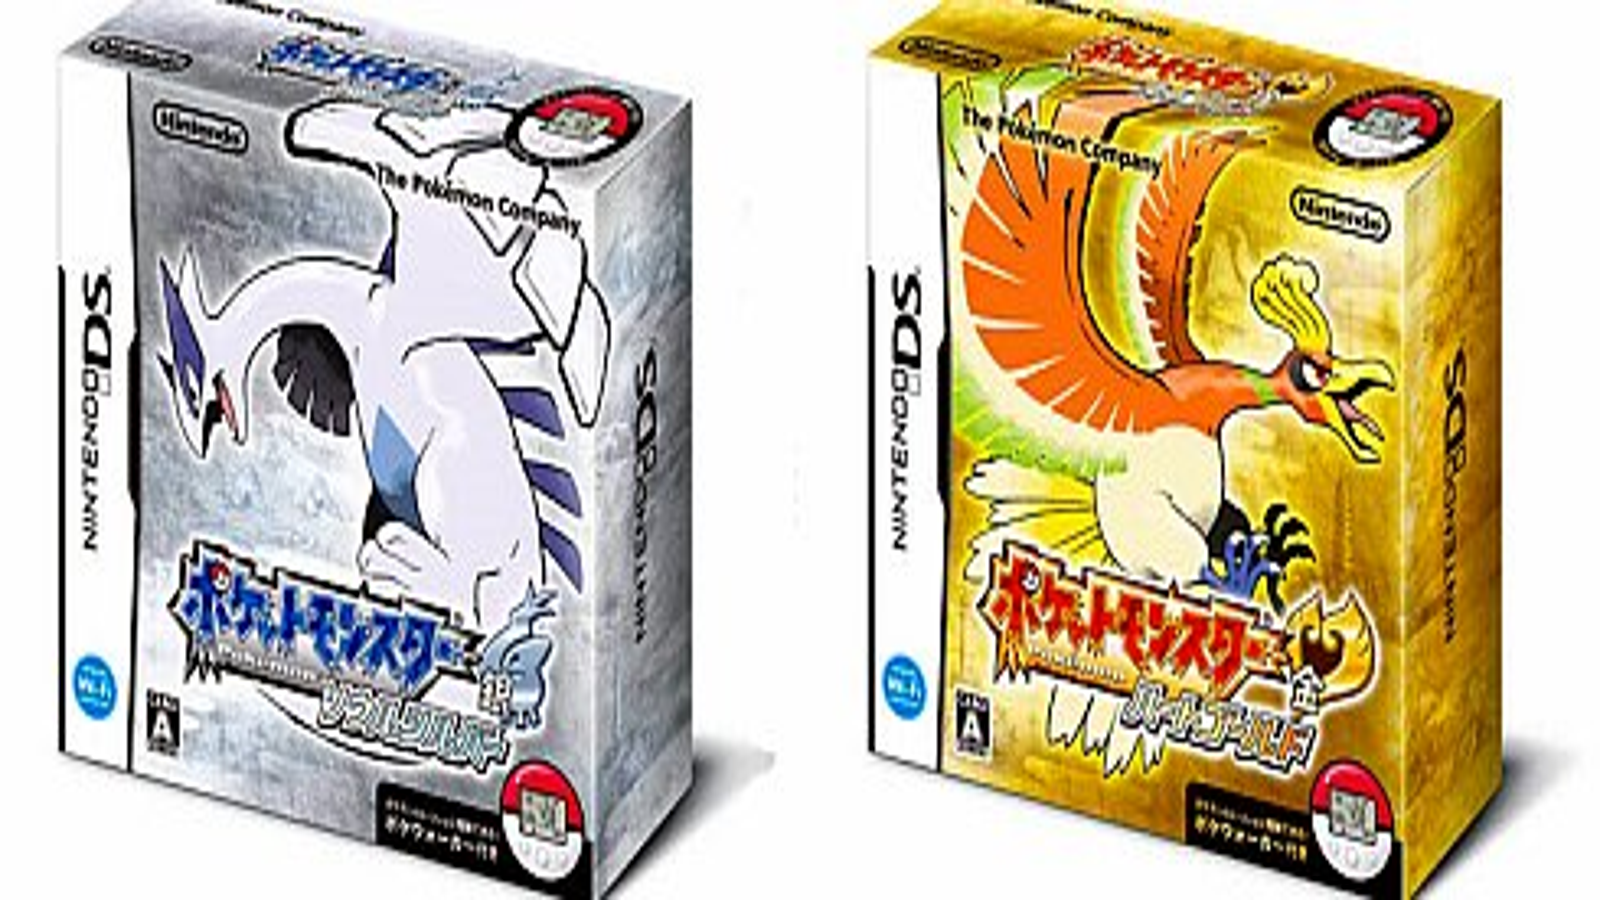 Pokemon Gold And Silver Getting Boxed 3DS Release In Europe And